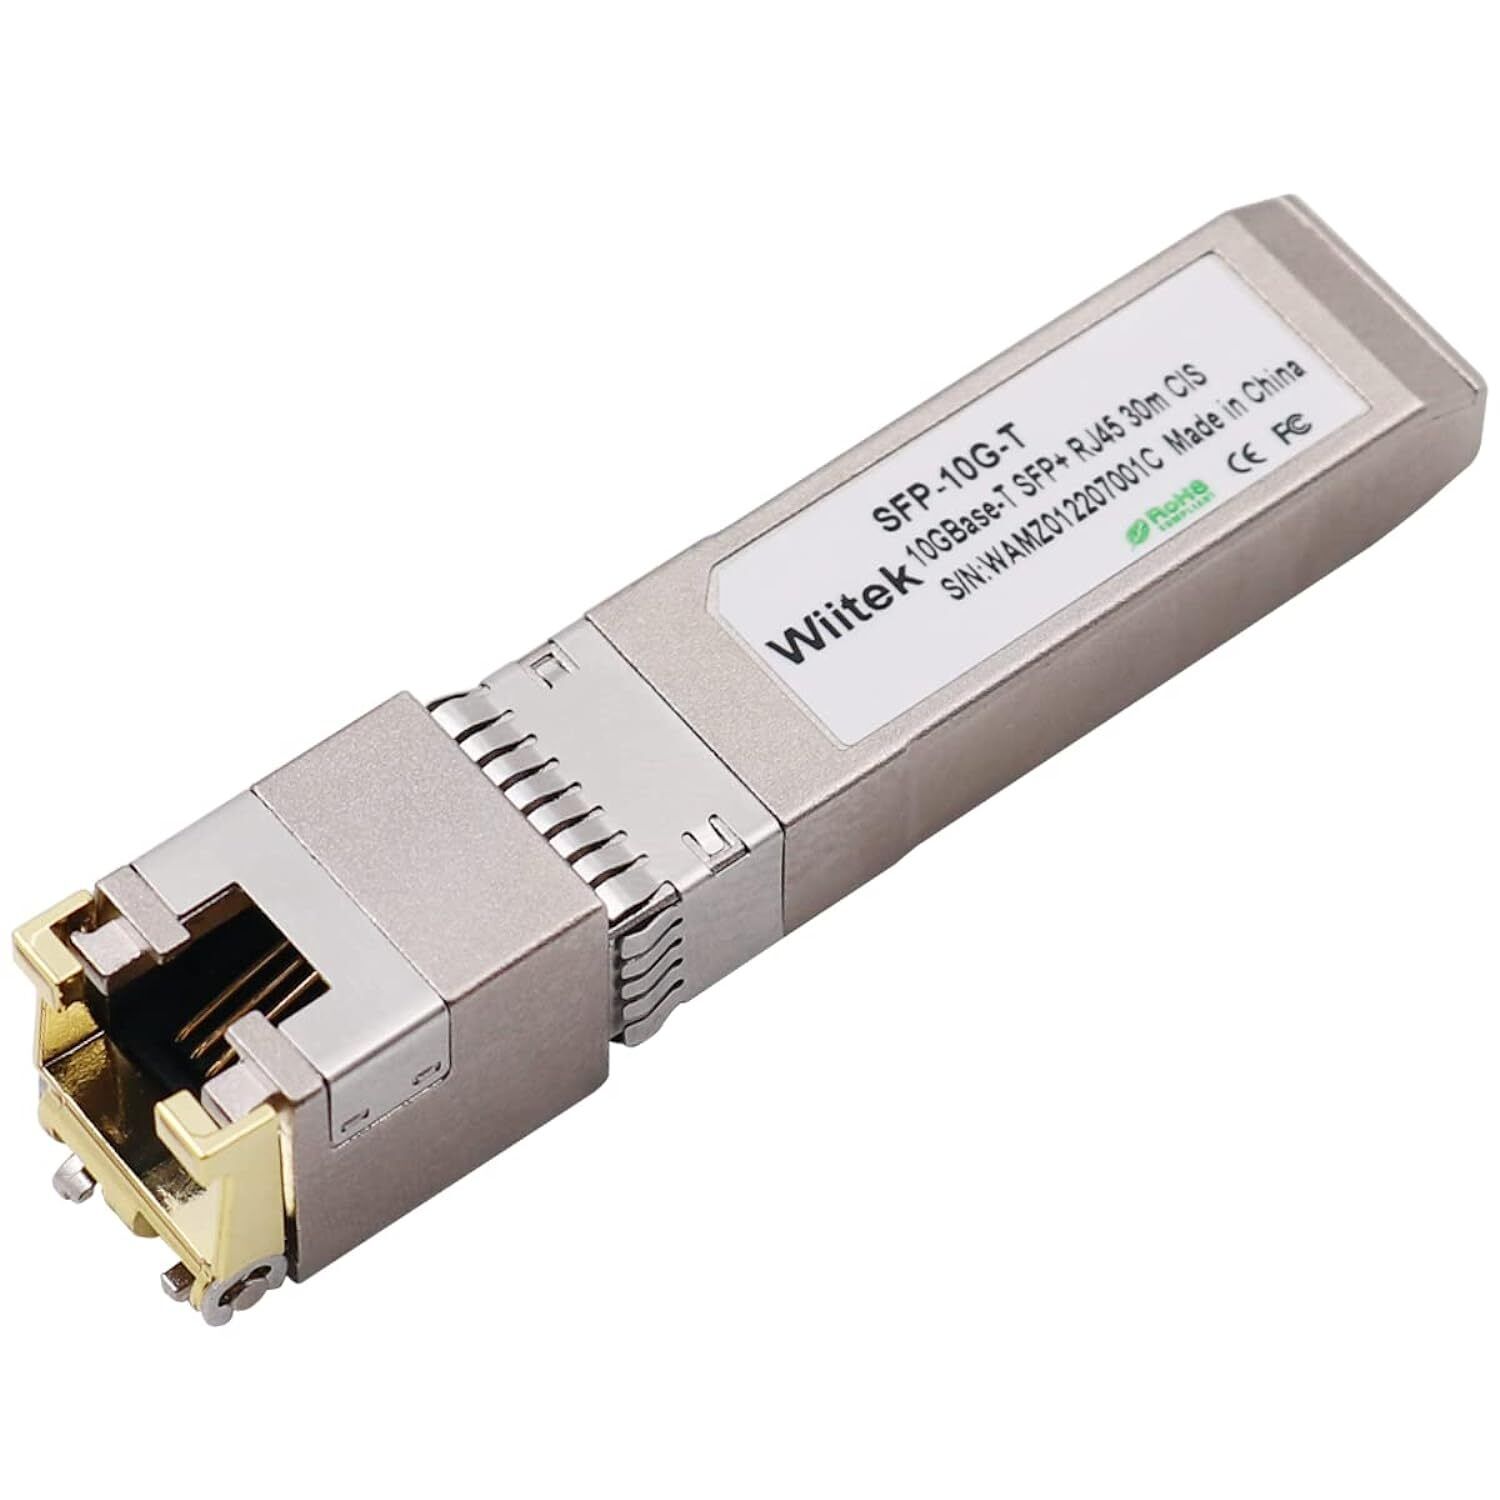 Sfp+ To Rj45 Copper Modules, 10Gbase-T Transceiver Compatible For Cisco Sfp-10